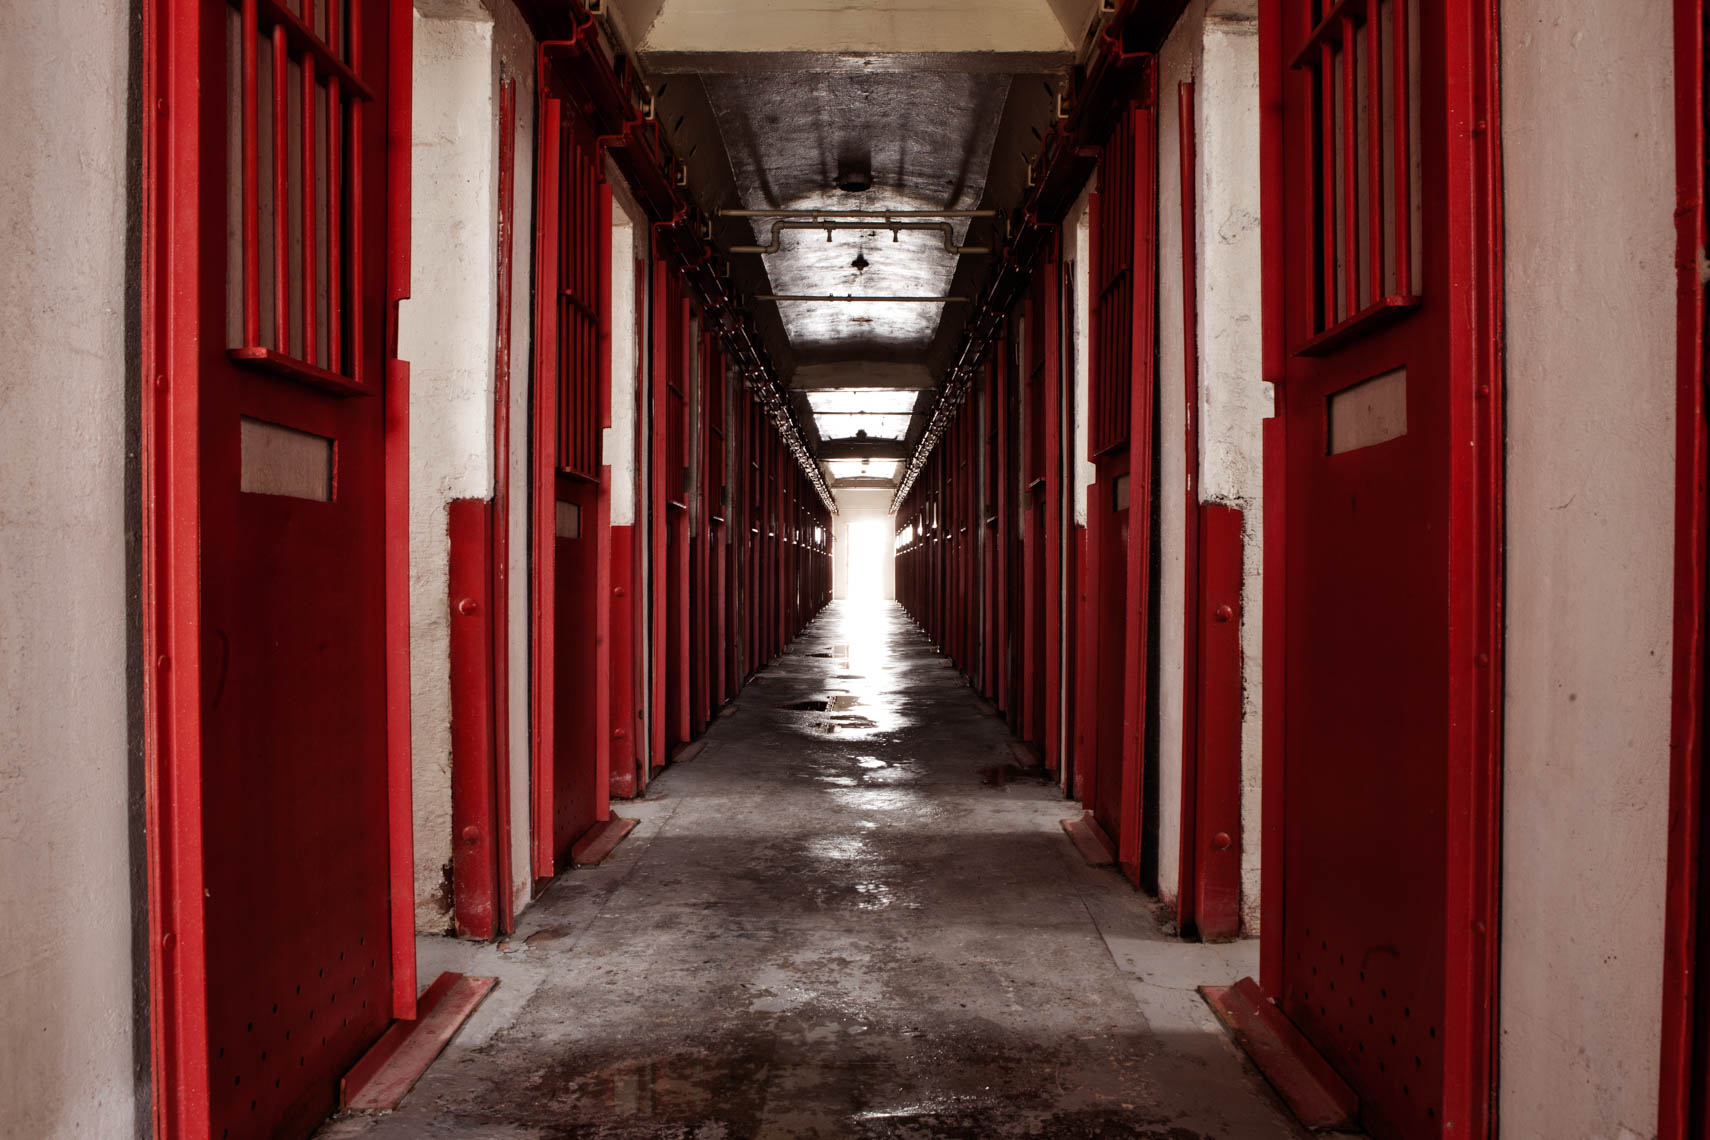 Angola Prison - The Red Hat